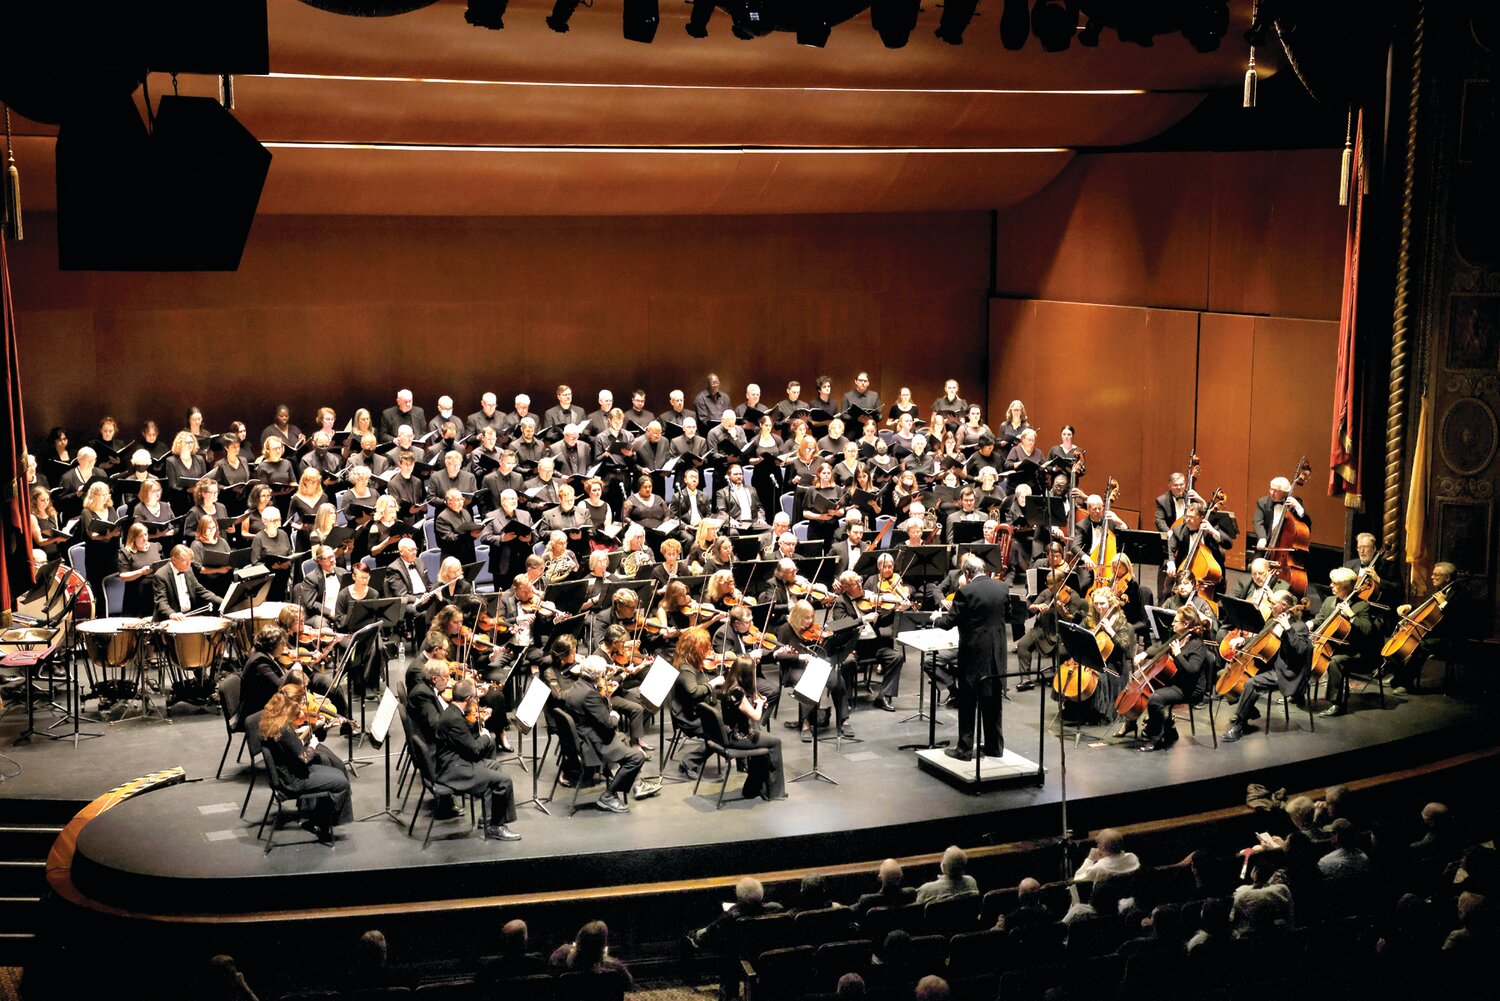 The LOTUS Project performs Beethoven's 9th Symphony last year, along with the Capital Philharmonic of New Jersey and Somerset Hills Chorus, Patriots Theater at the War Memorial.